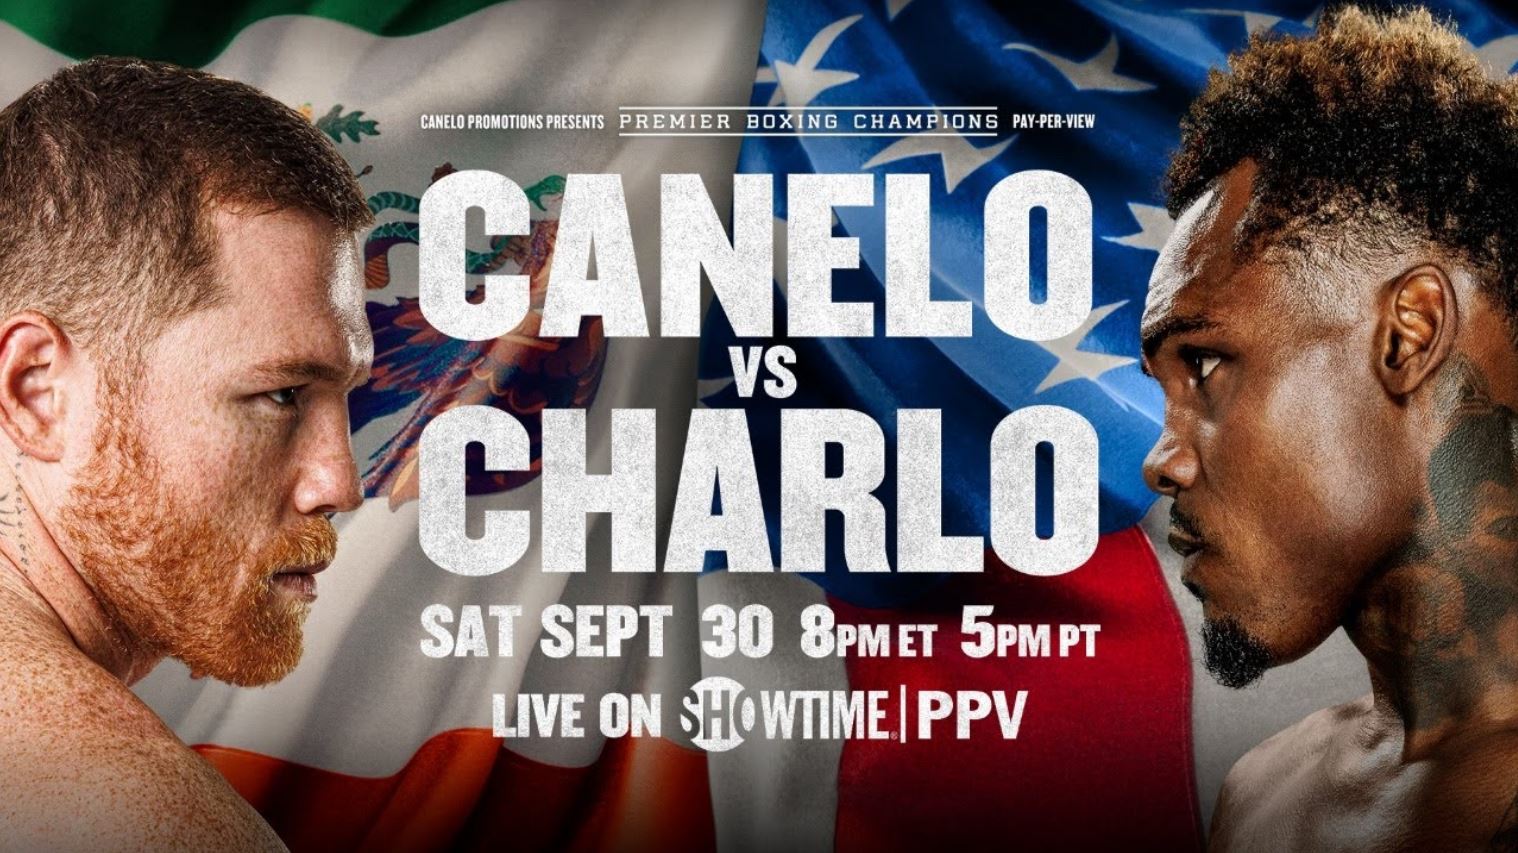 showtime ppv online